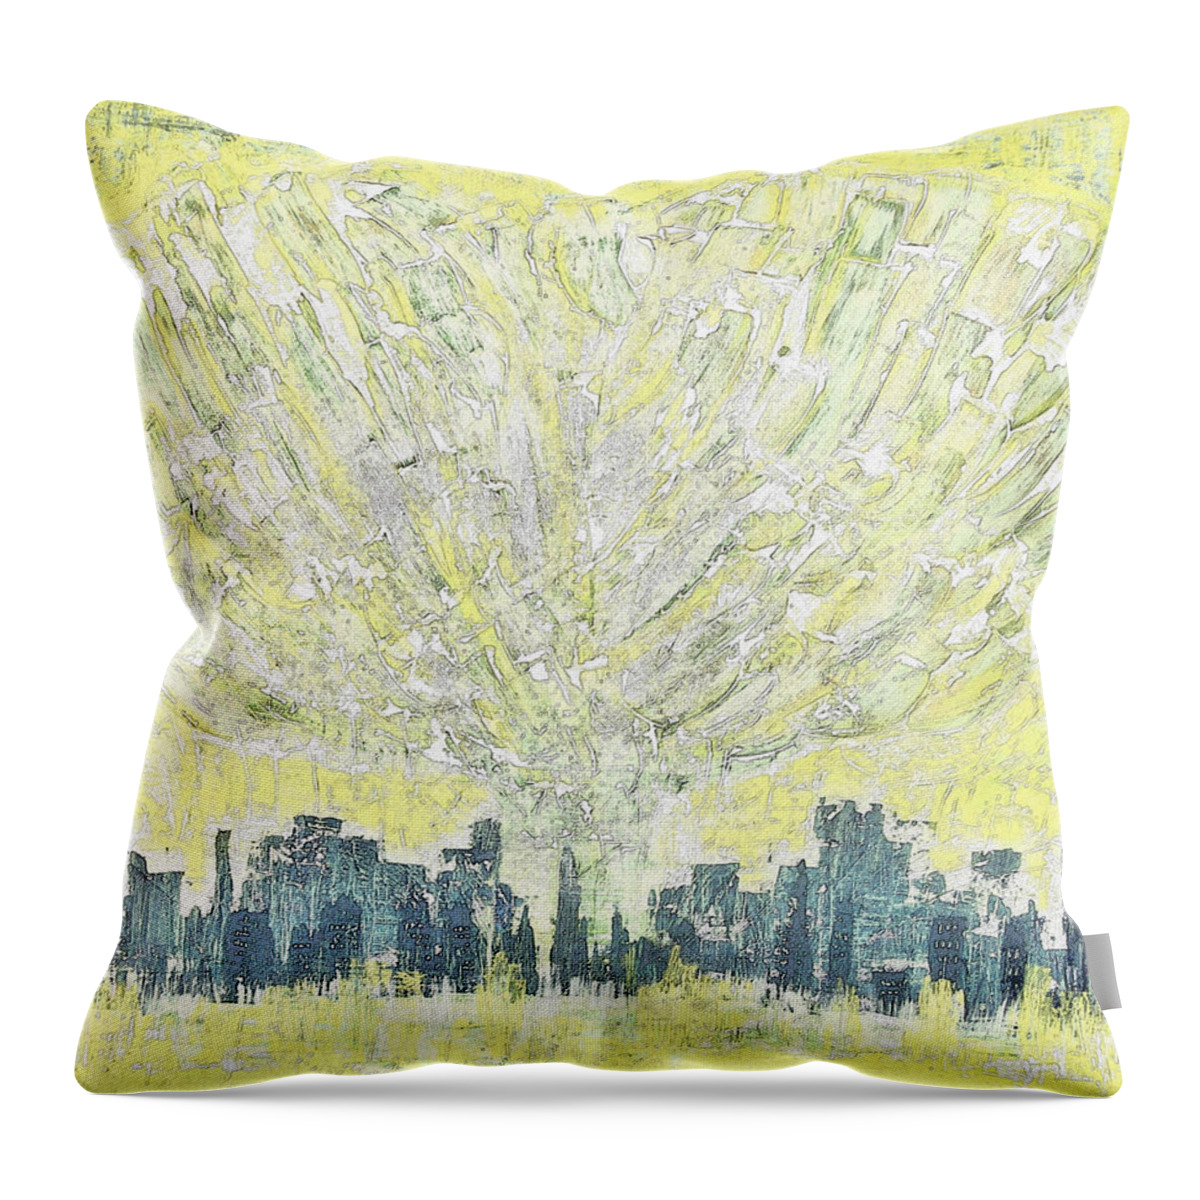 City Digital Arwork Throw Pillow featuring the painting DG1 - yes heart D1 by KUNST MIT HERZ Art with heart